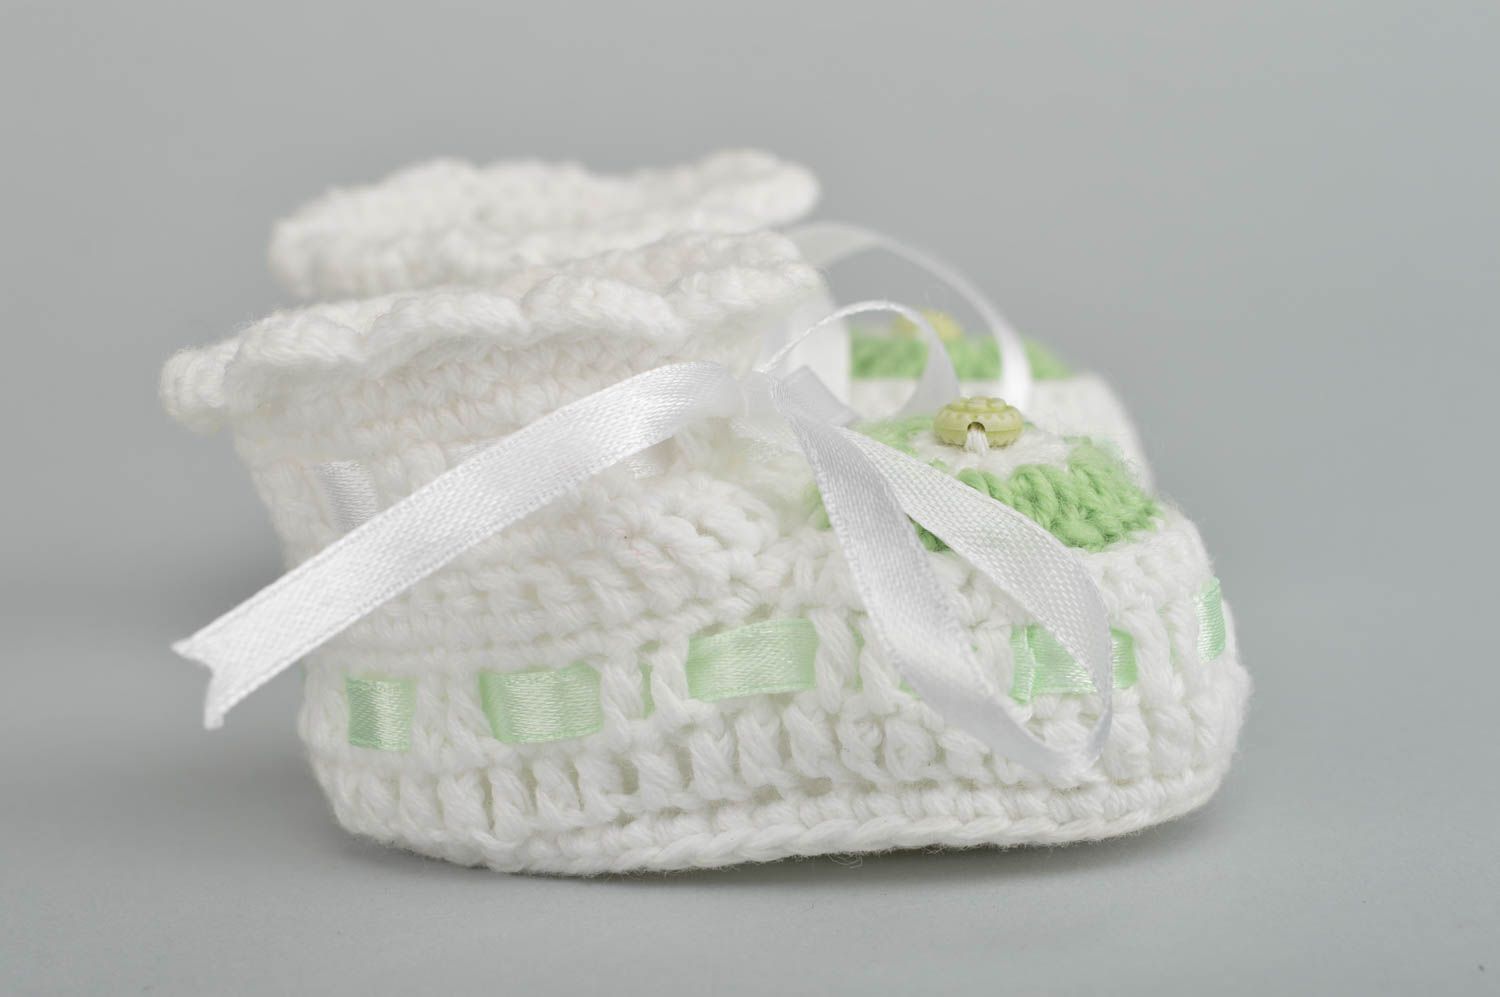 Stylish handmade baby booties crochet baby booties cute baby outfits gift ideas photo 3